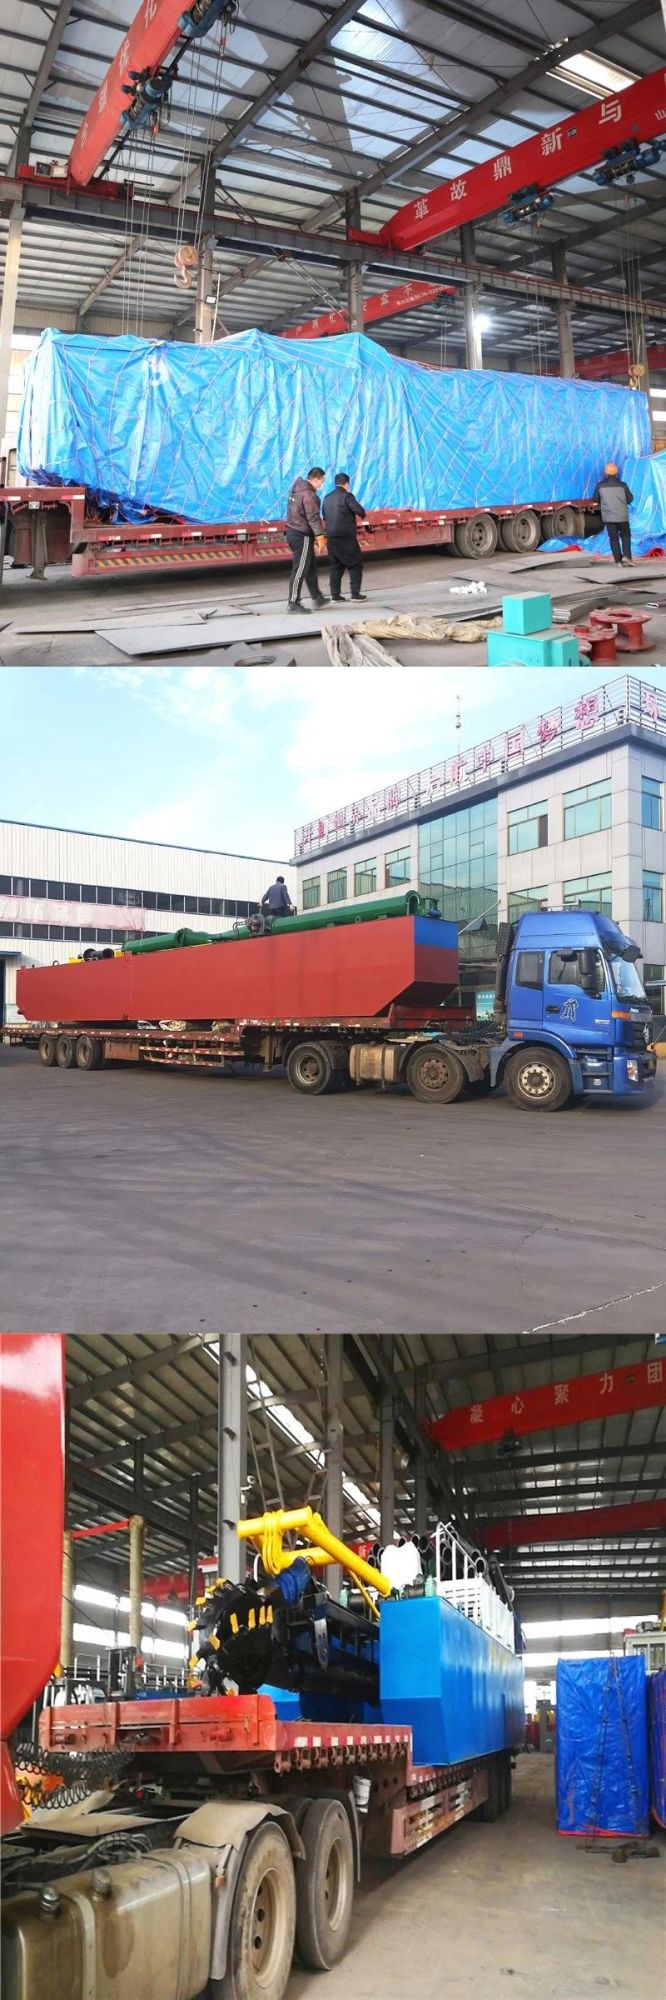 Reasonable Price Jet Suction Sand Dredger Used in River